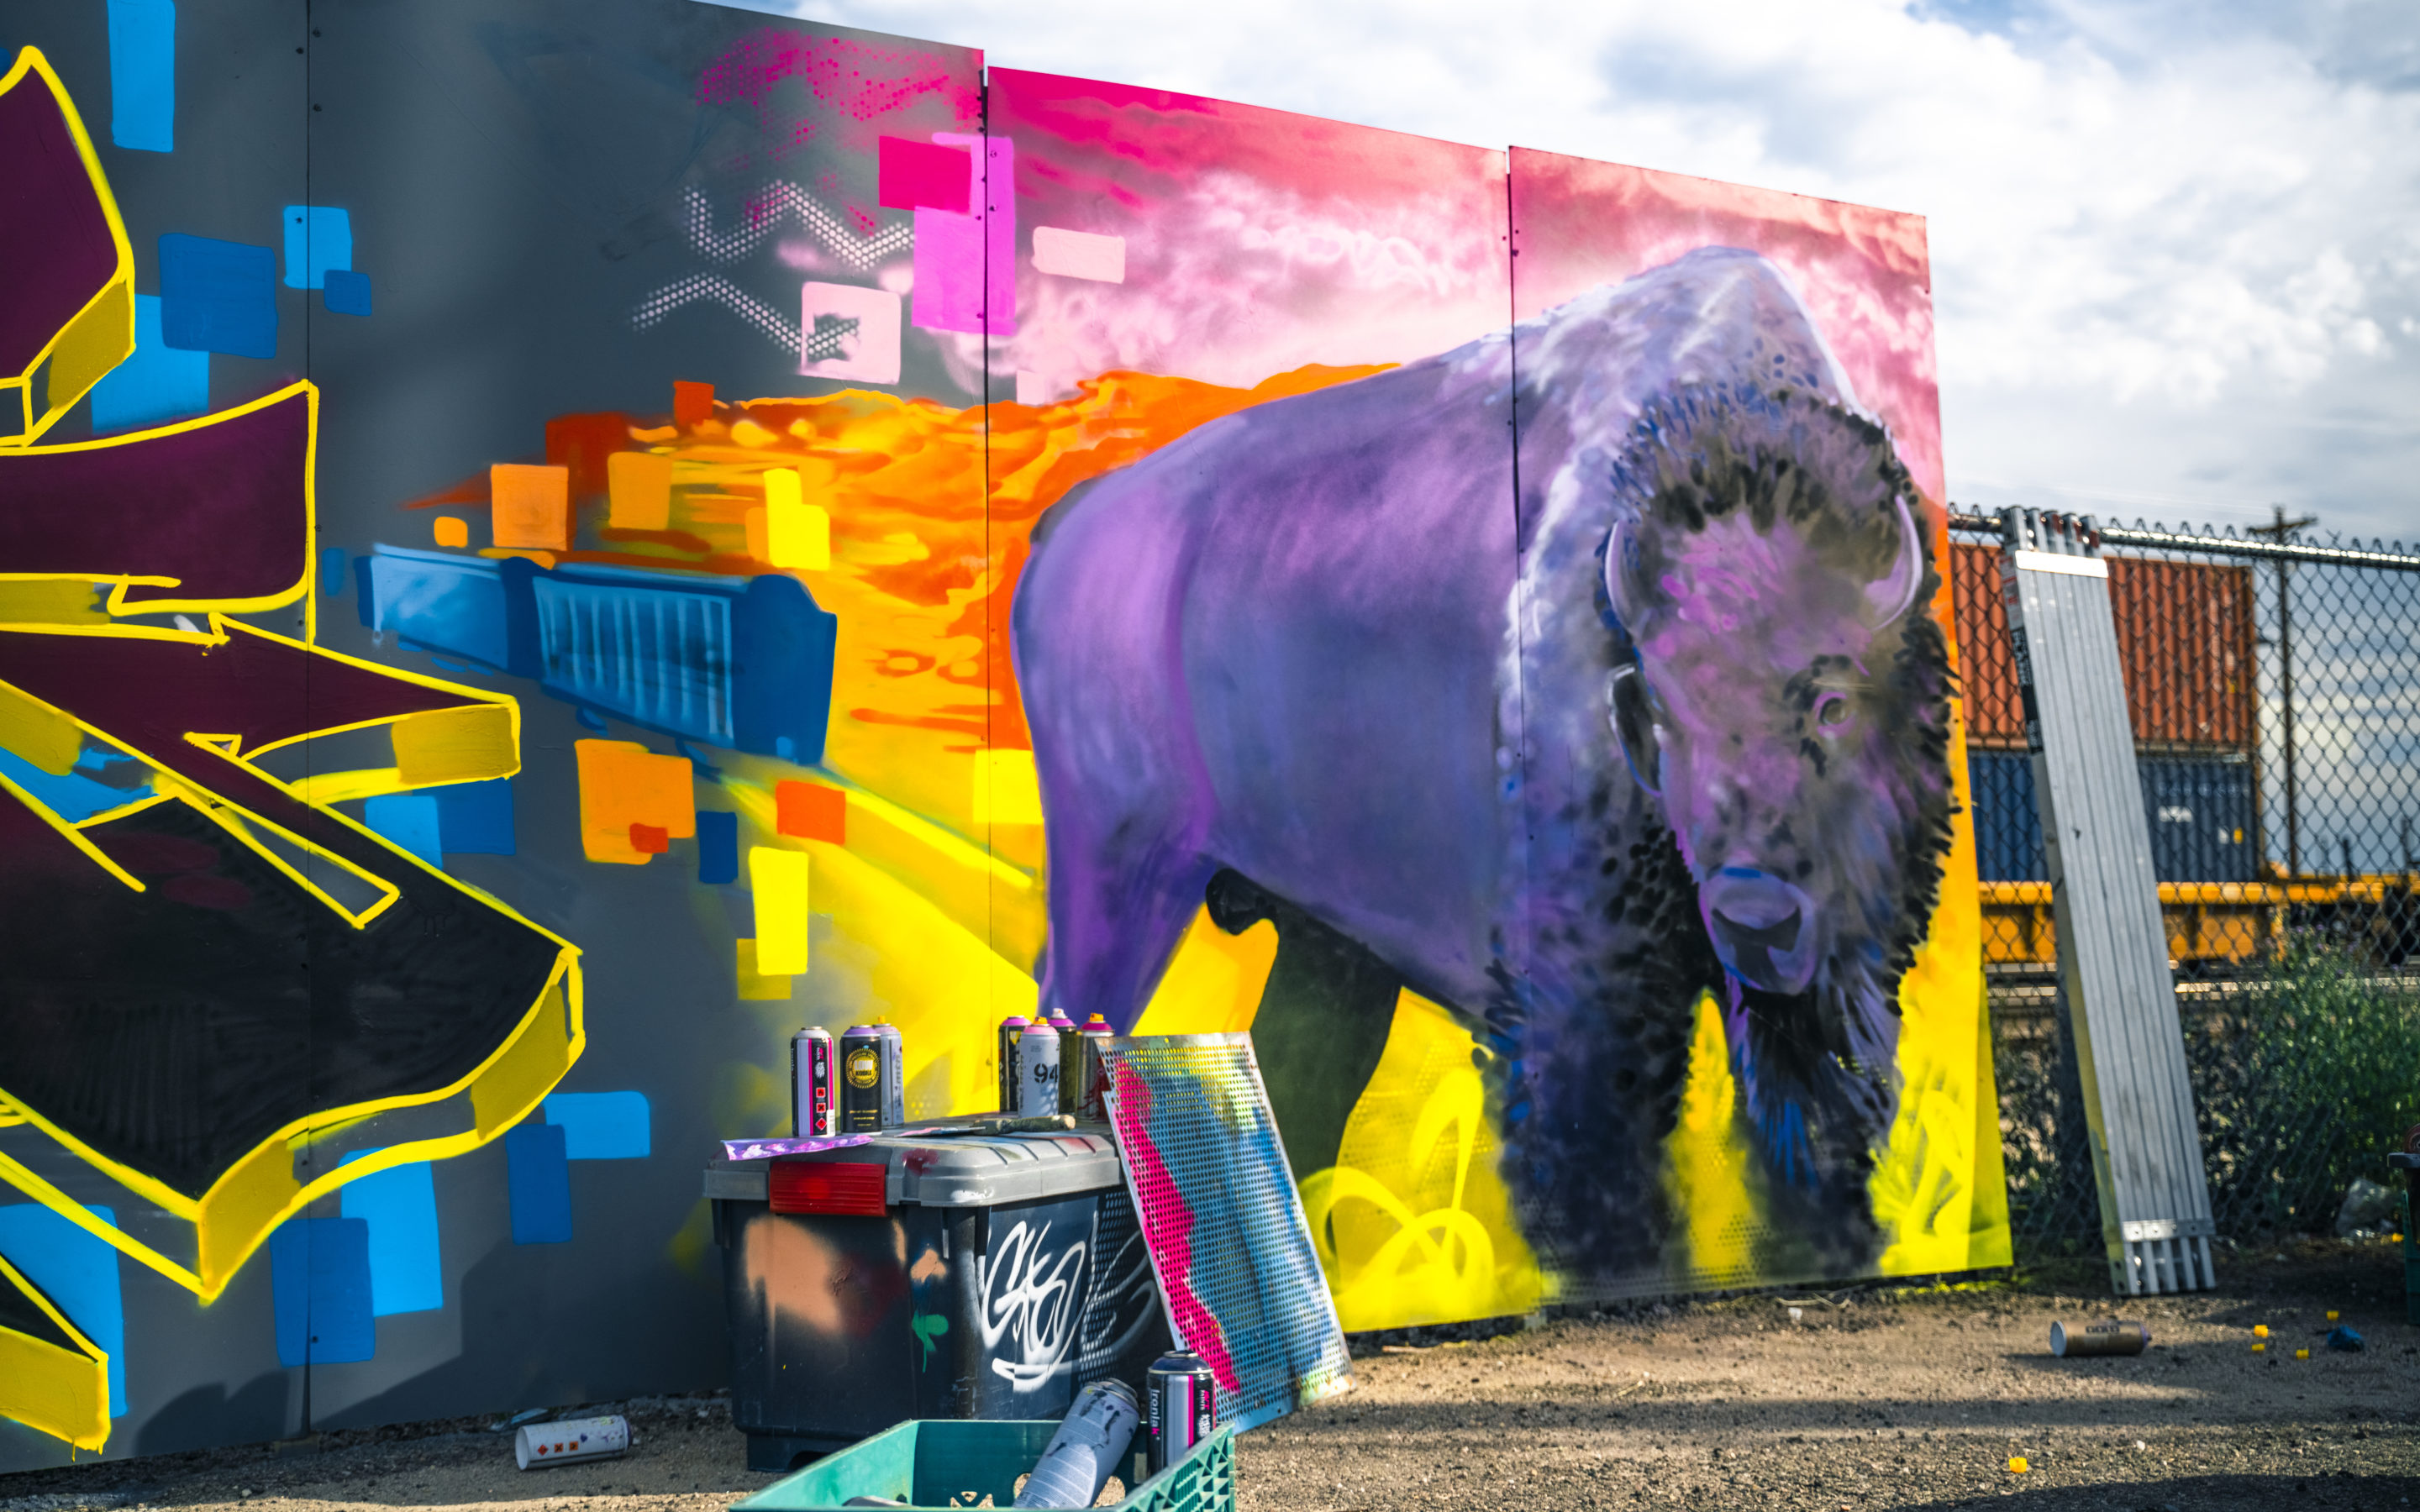 Purple bison spray painted with orange hills in the background